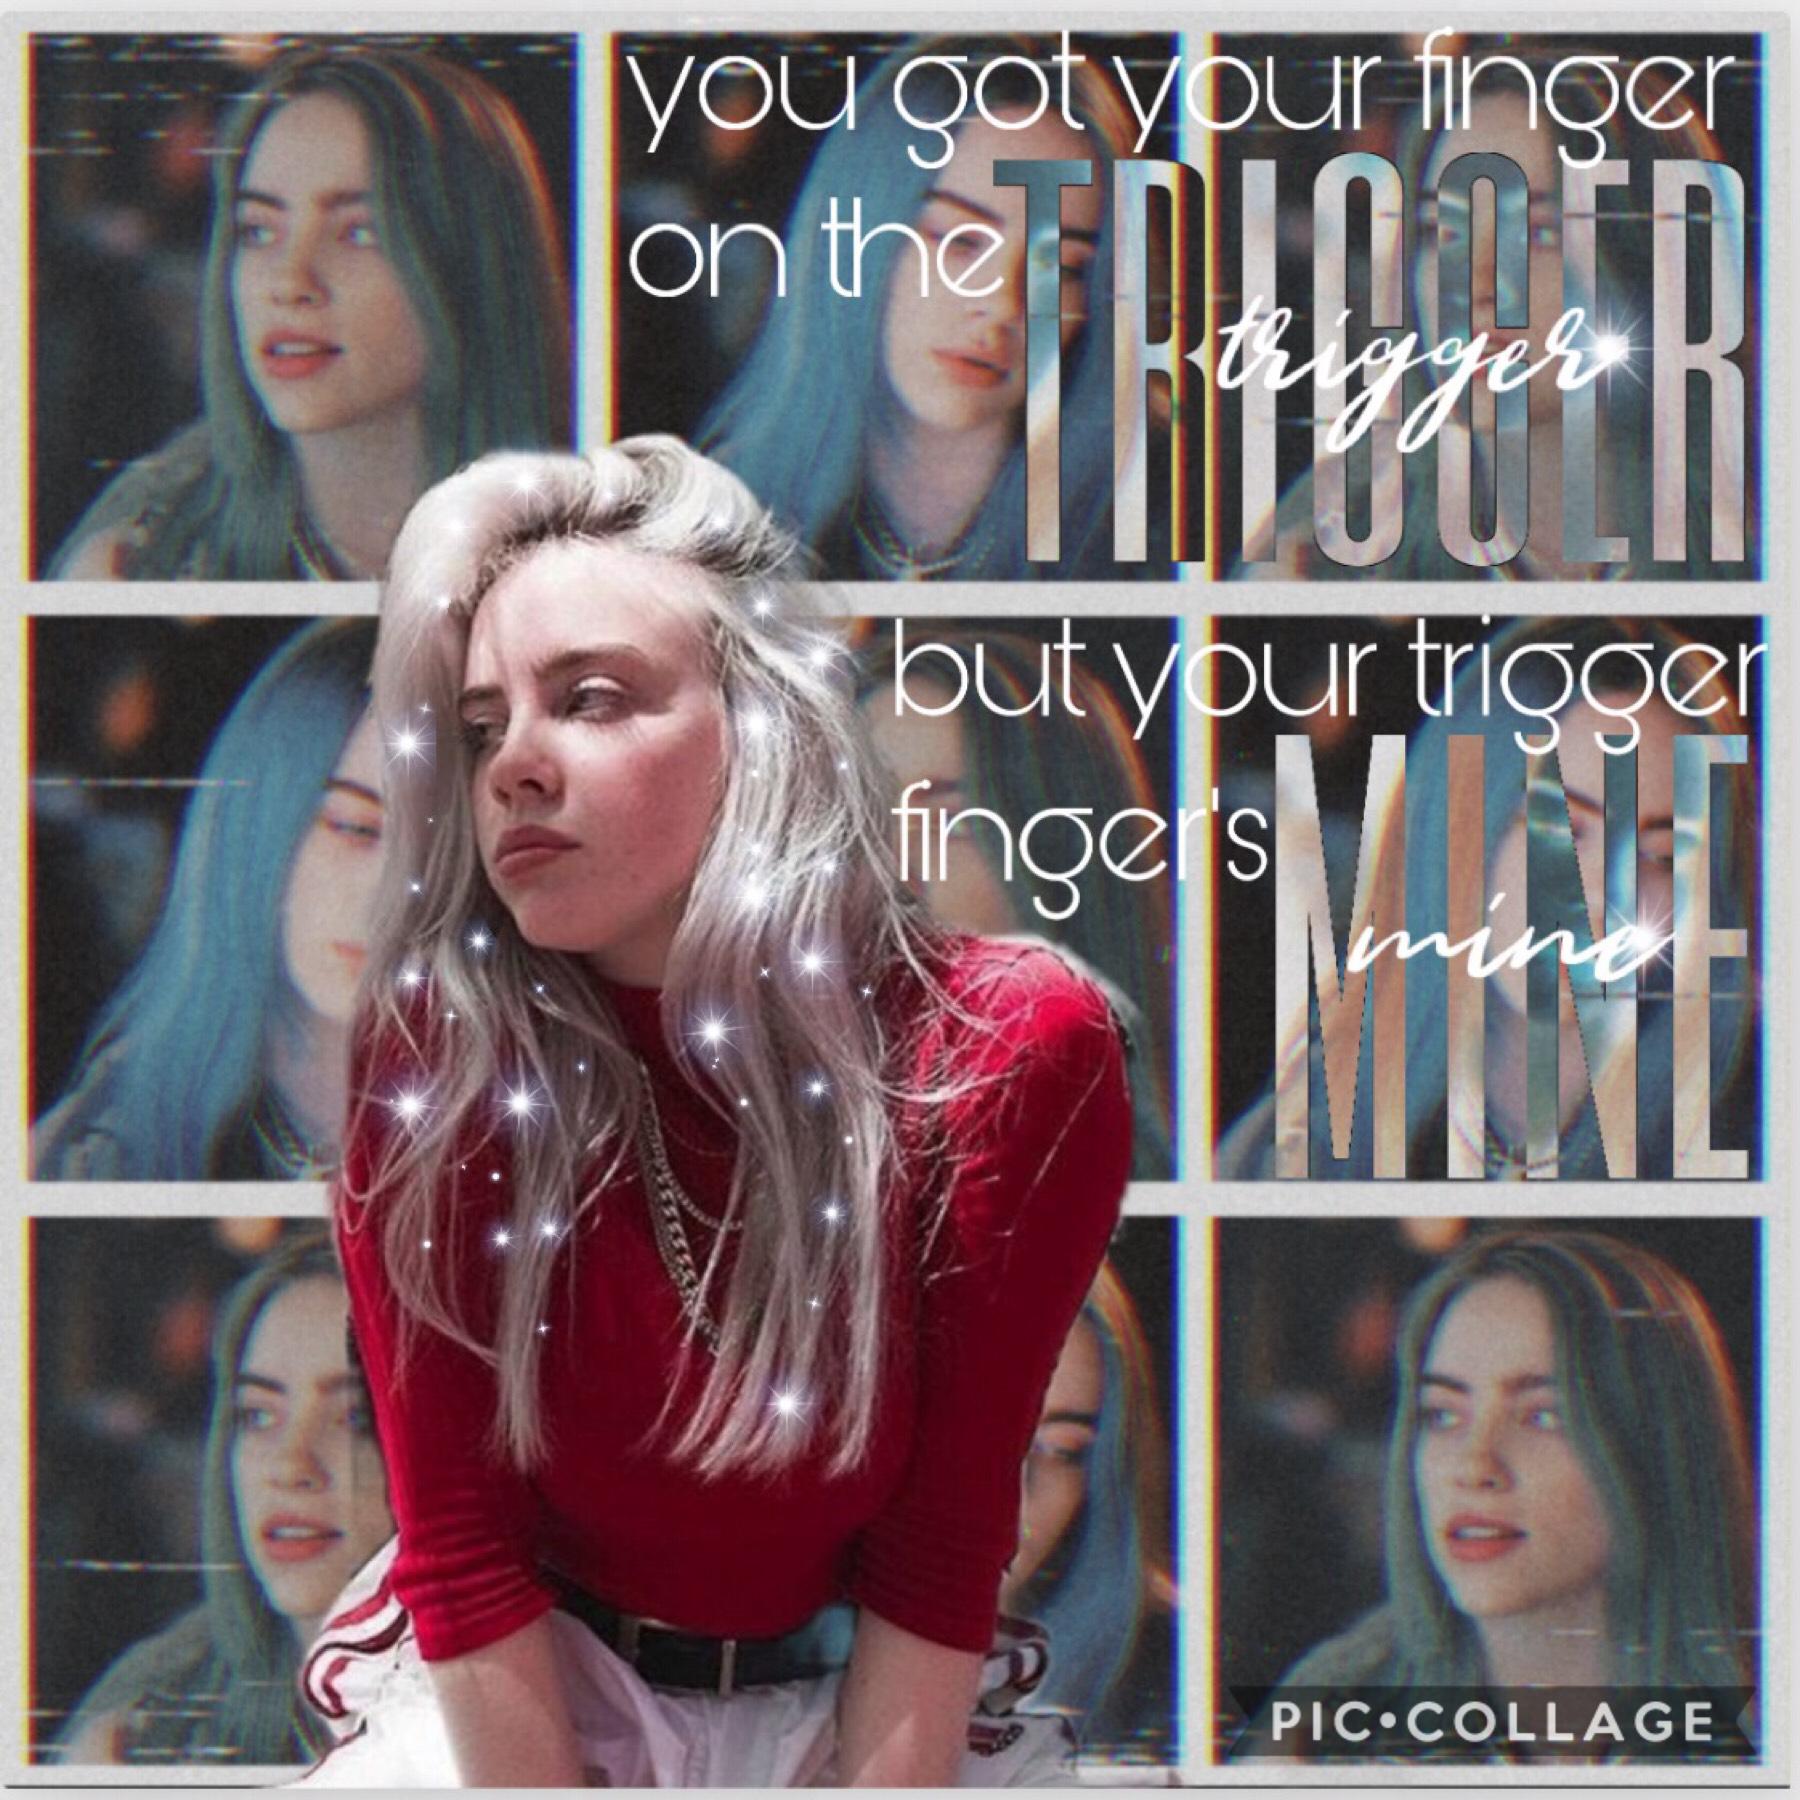 billie eilish is actually one of the best things this world has blessed us with don’t @ me. 
background: Pic Collage, PicsArt. text/filters/paint: PicsArt, Pic Collage